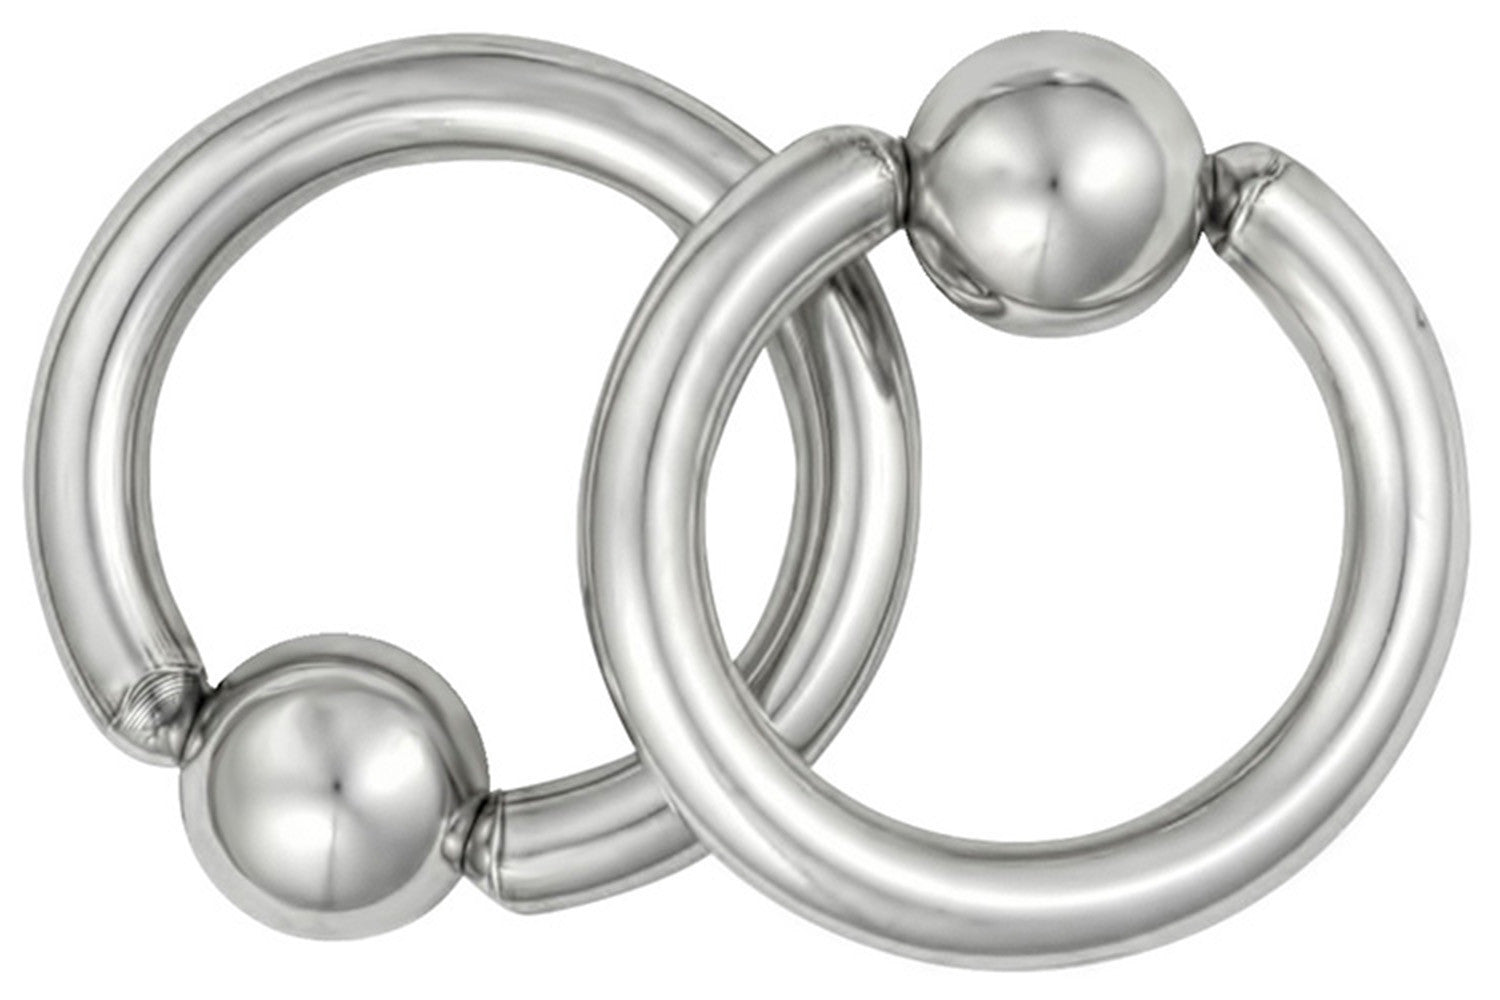 This jewelry is made with surgical grade 316L Stainless Steel. It is hypoallergenic and nickel free.